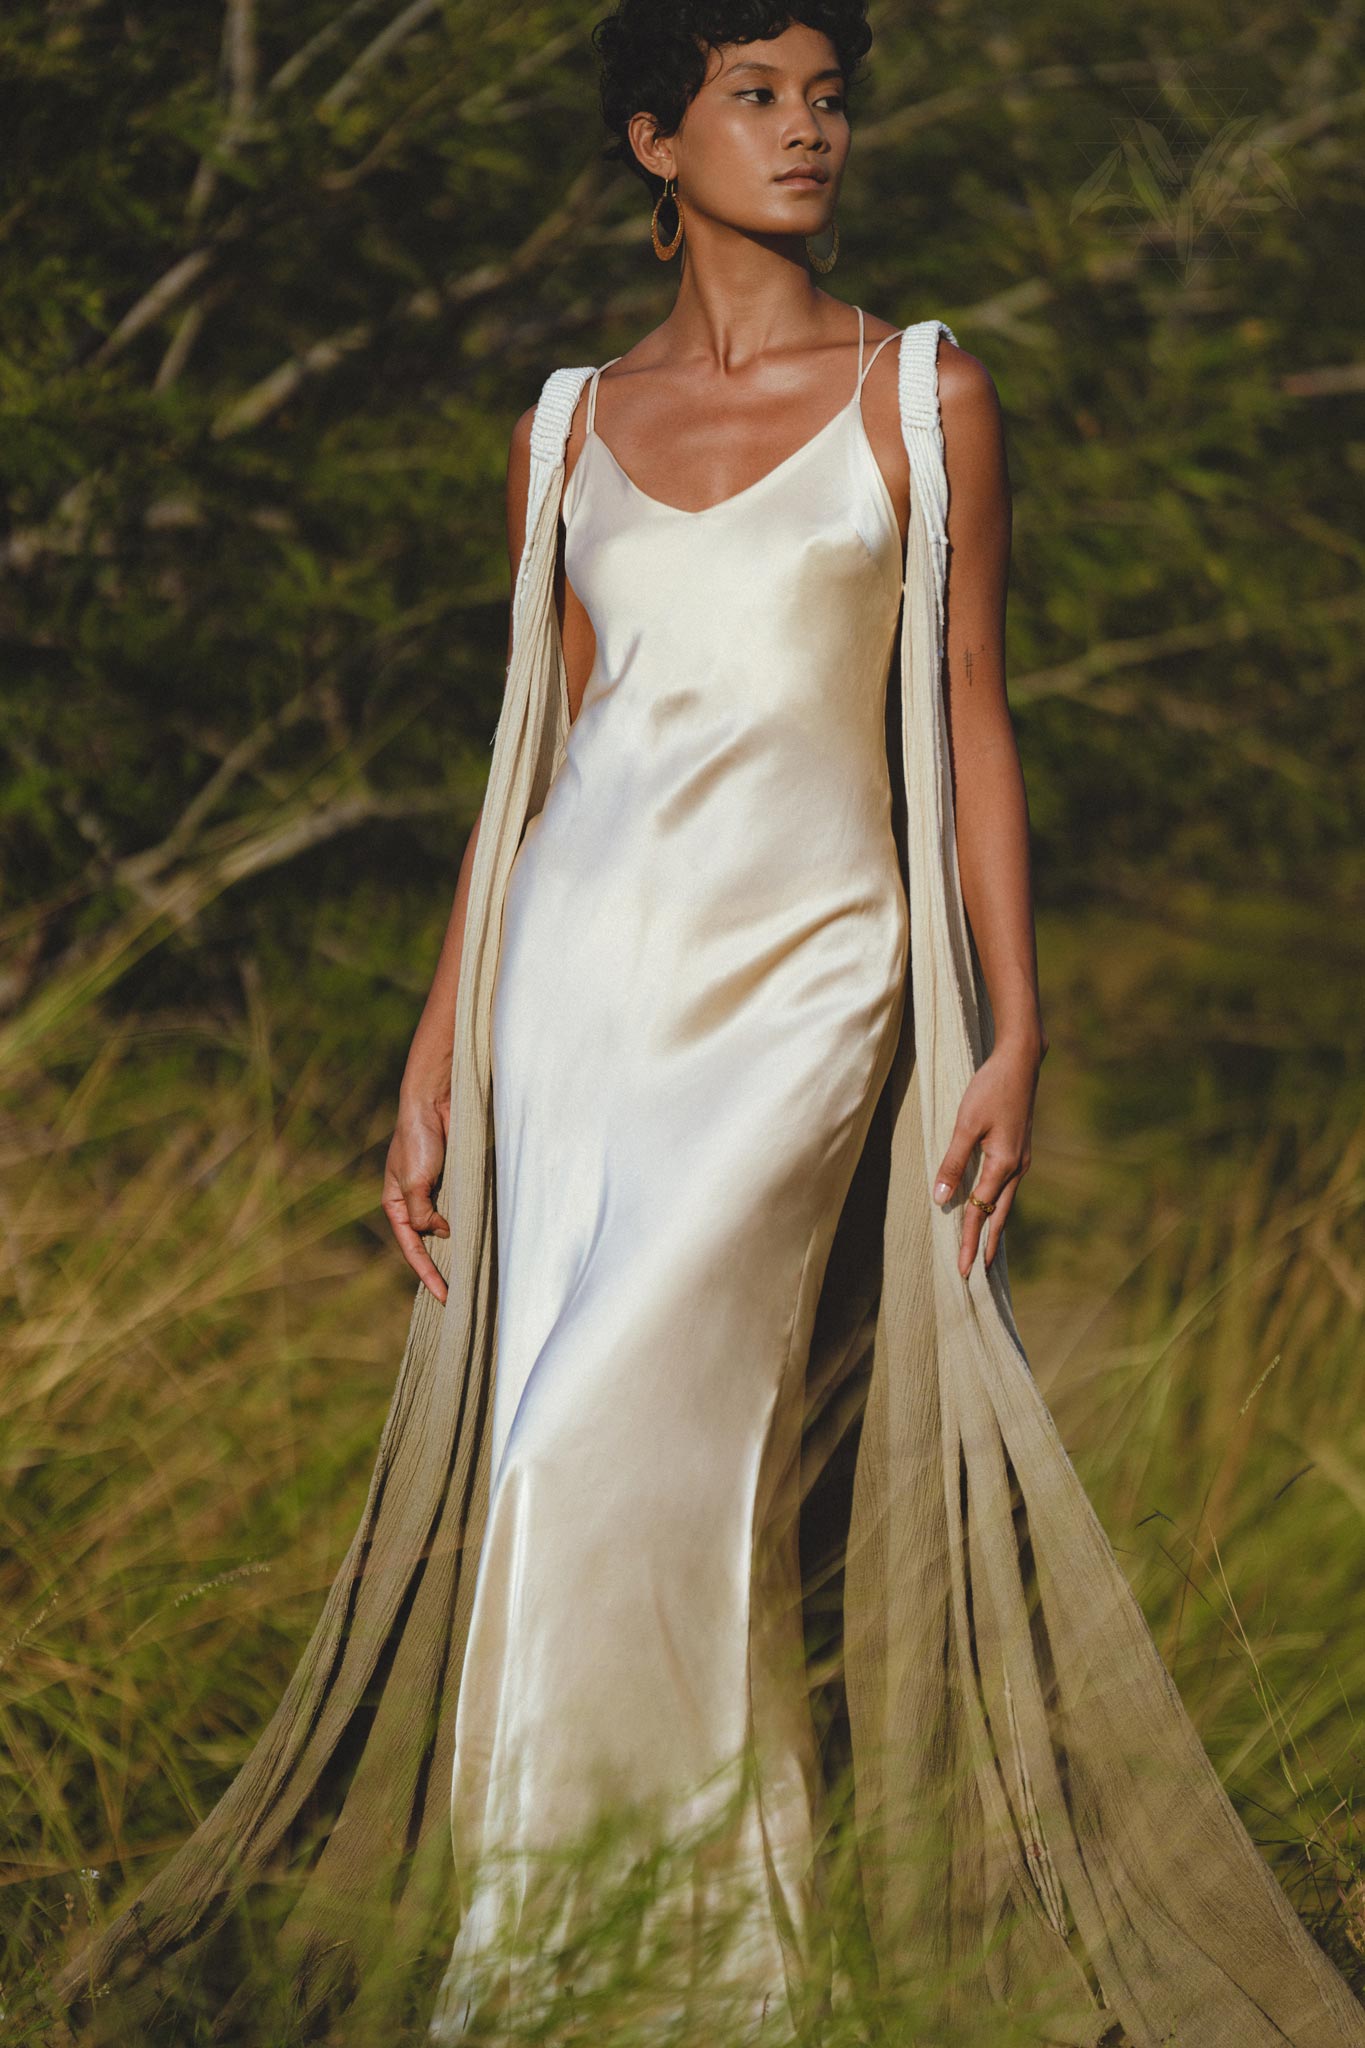 Embrace your inner goddess with this ethereal silk wedding gown in ivory.